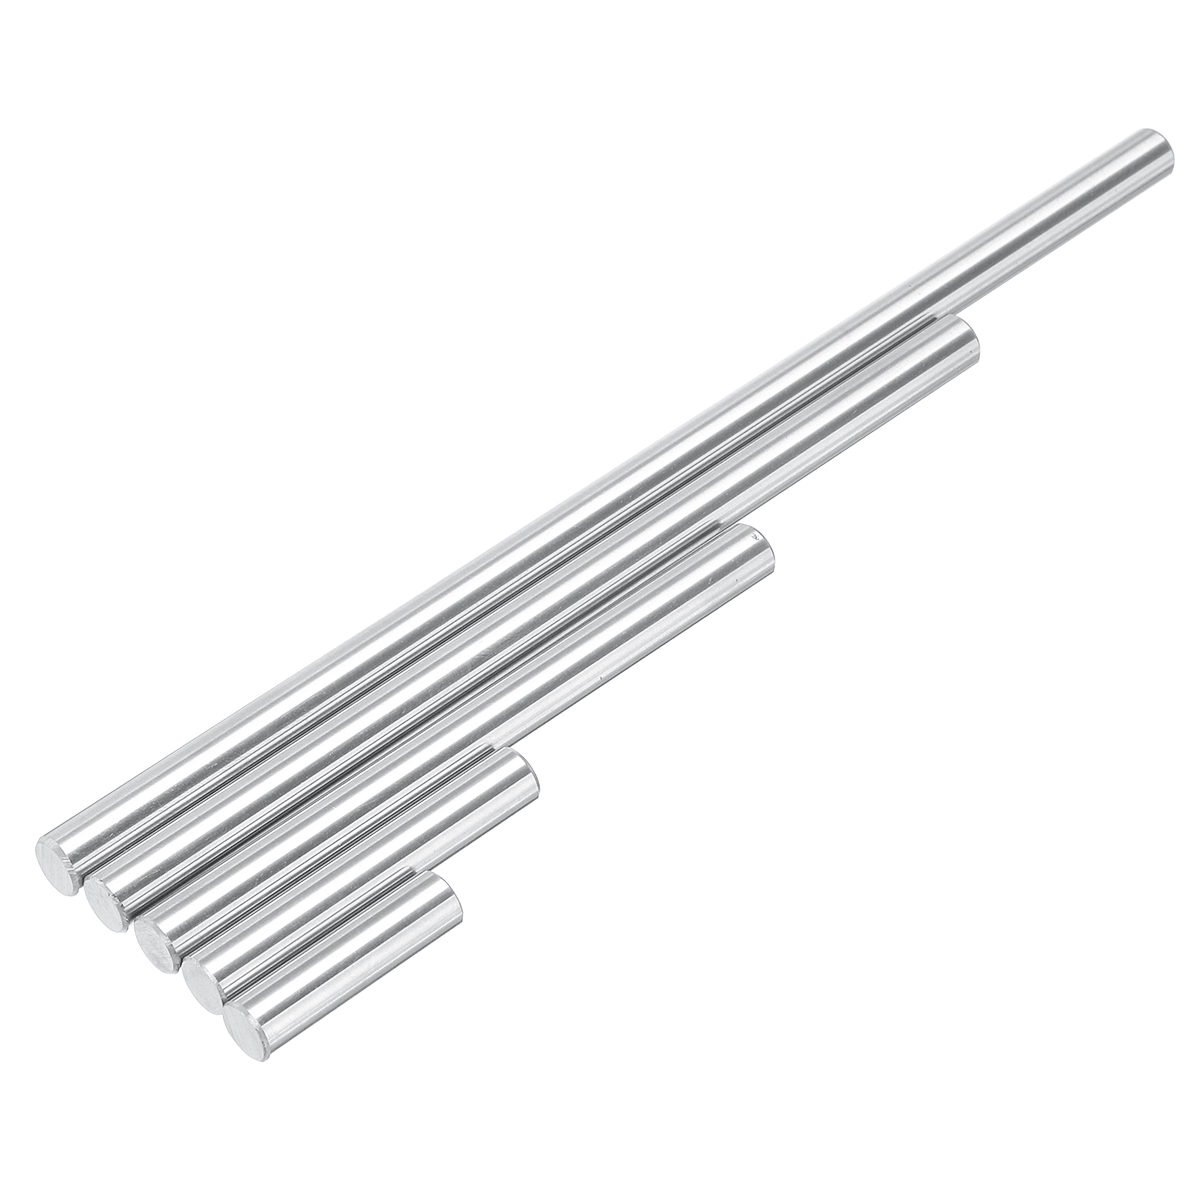 

7pcs 8.4mm Ejector Pins Set 3-20cm Machine Reamer Pins for Push Rifling Buttons